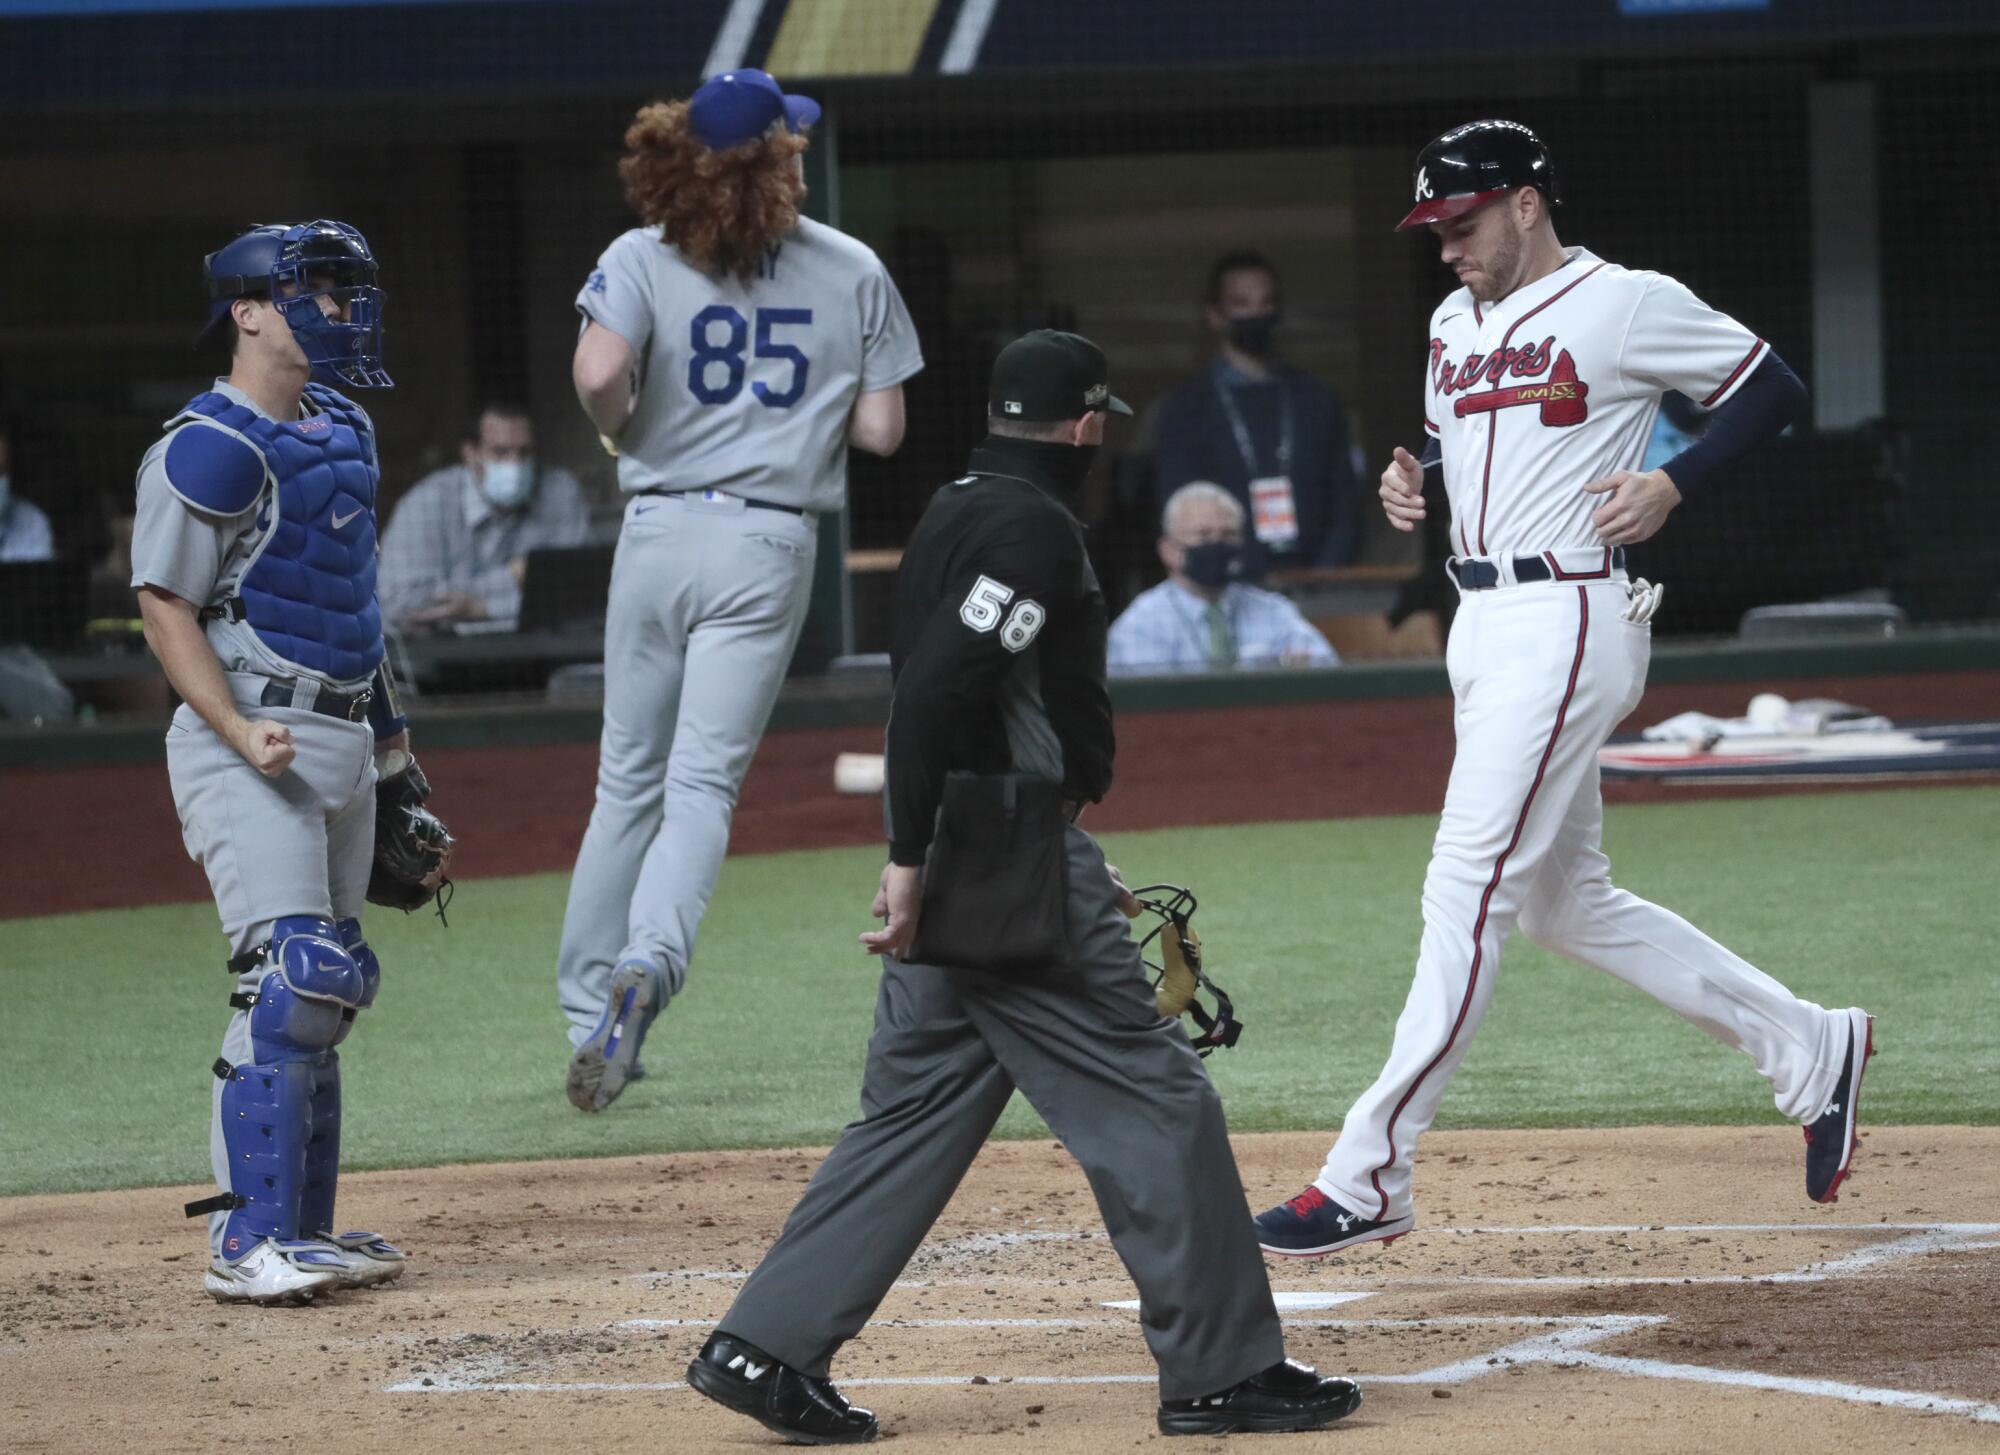 Atlanta's Freddie Freeman scores on a sacrifice fly in the first inning.